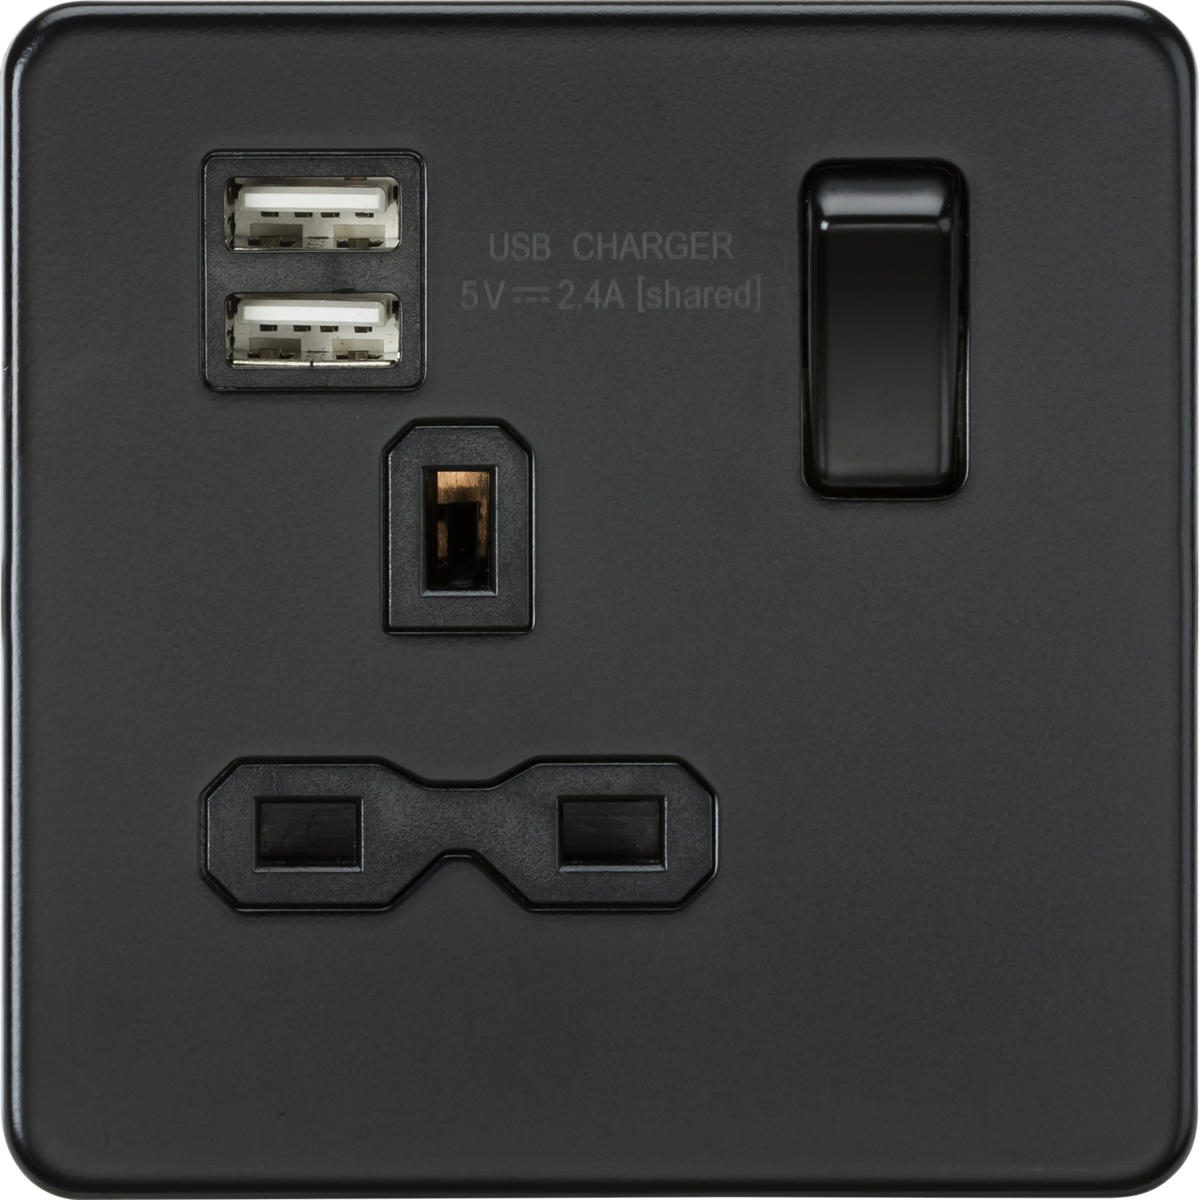 Screwless 13A 1G switched socket with dual USB charger (2.4A) - matt black